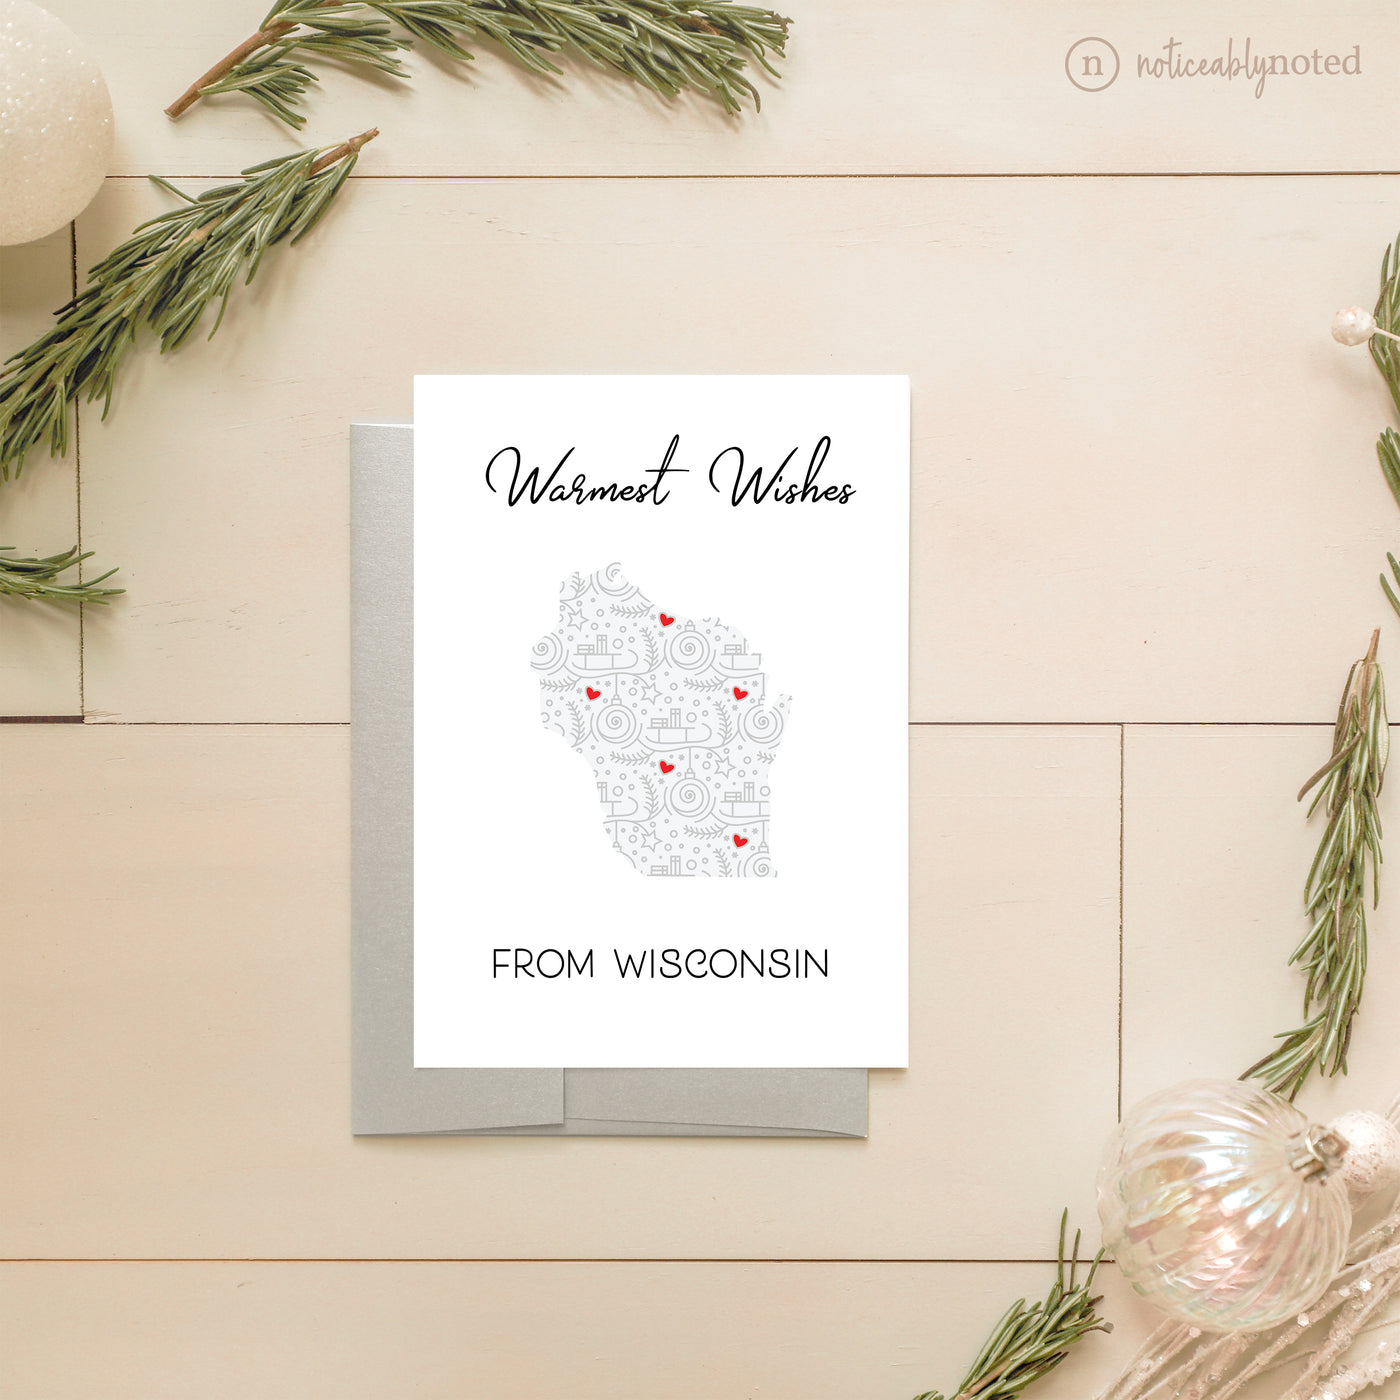 Wisconsin Holiday Card - Warmest Wishes | Noticeably Noted